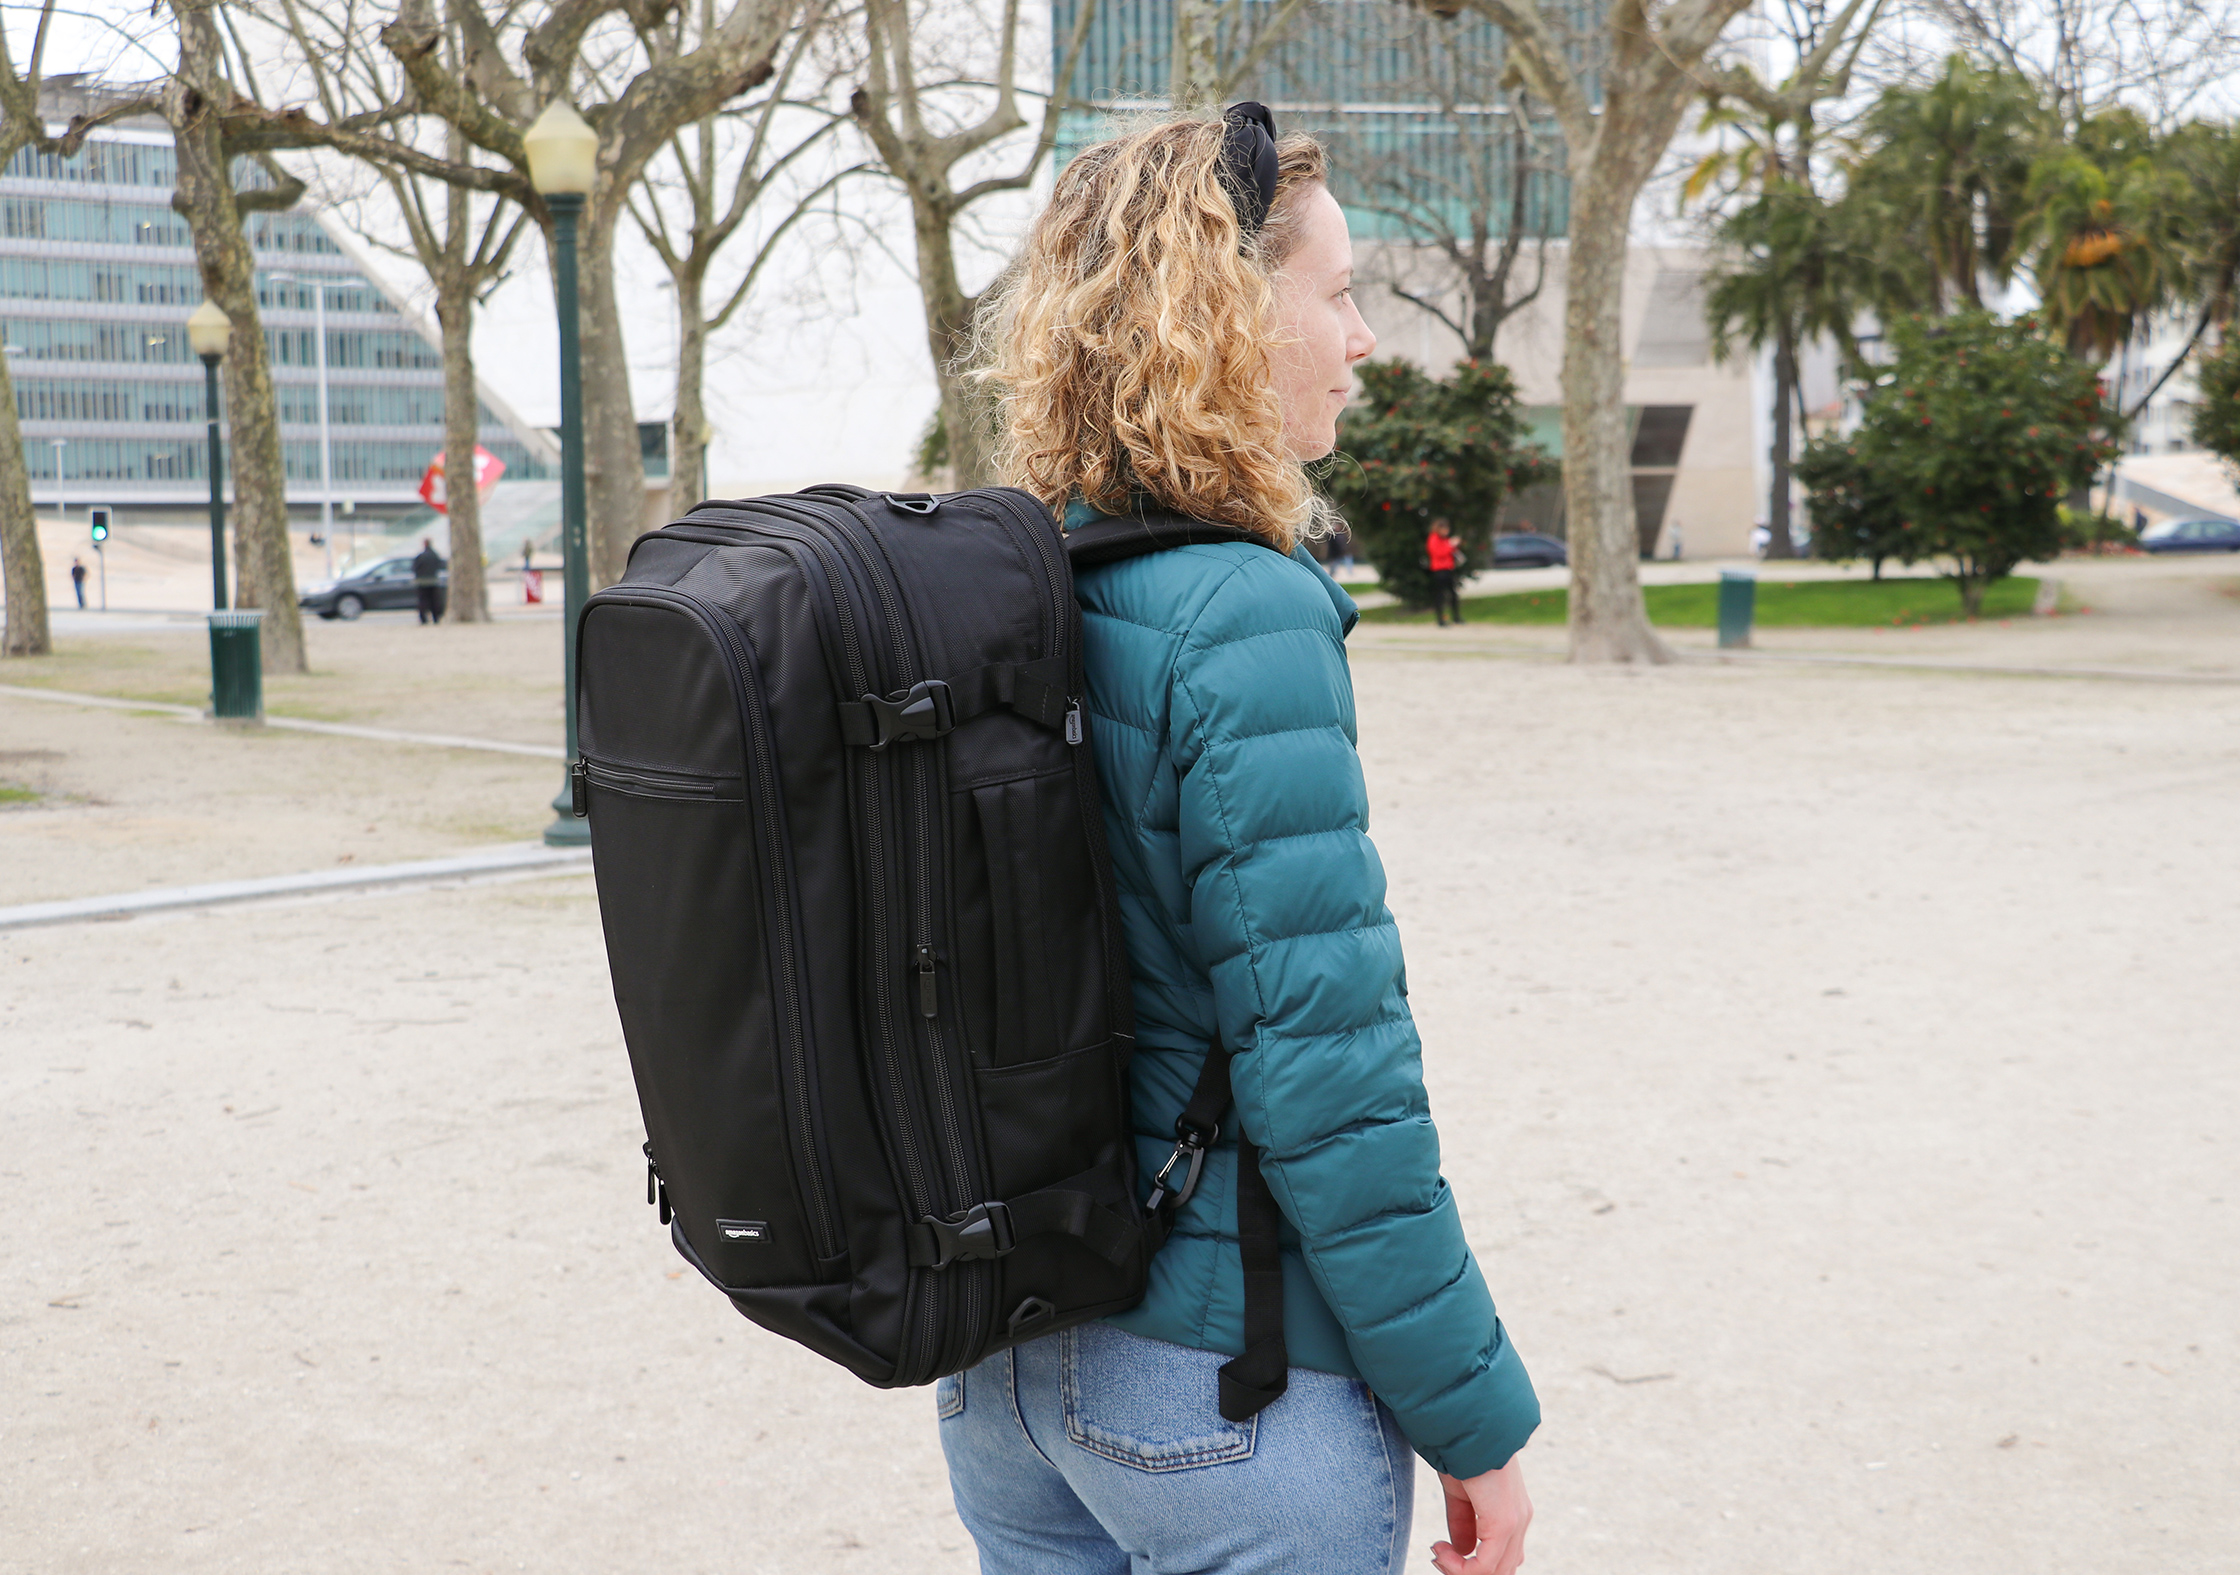 AmazonBasics Carry-On Travel Backpack In Porto, Portugal